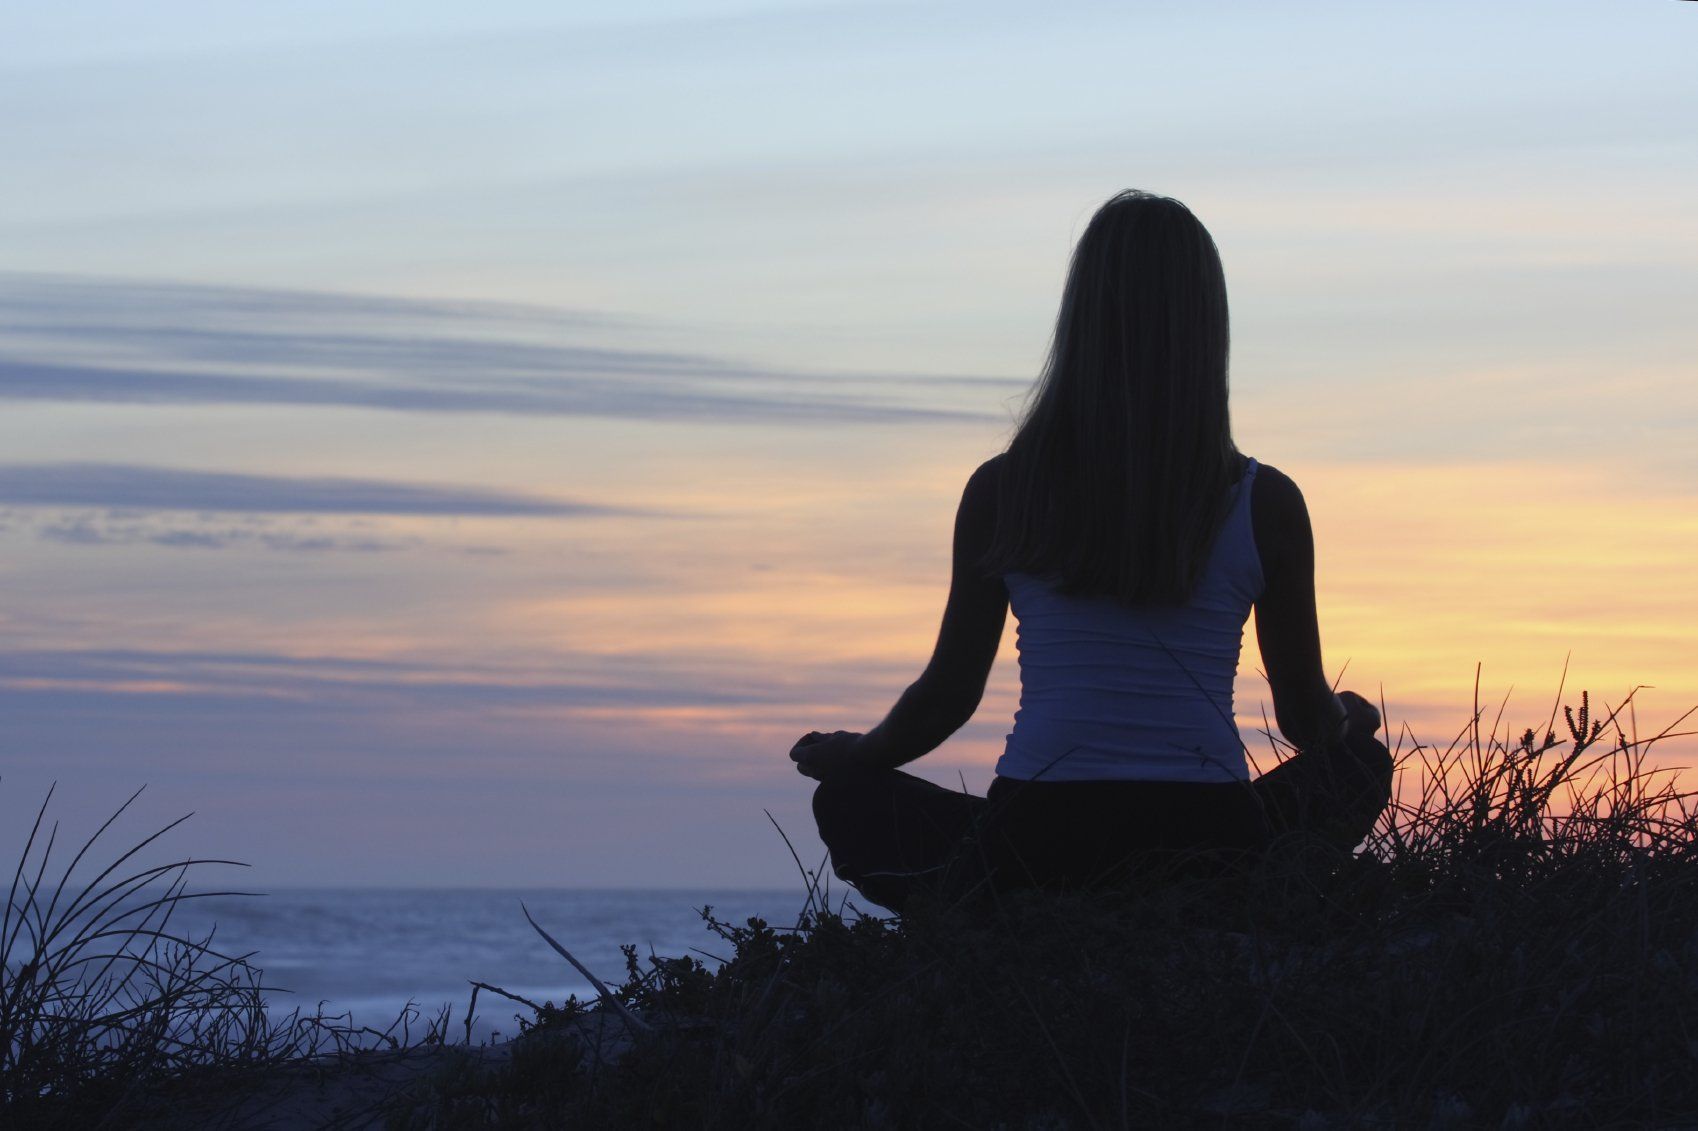 A woman seated in meditation pose with a sunset in the background